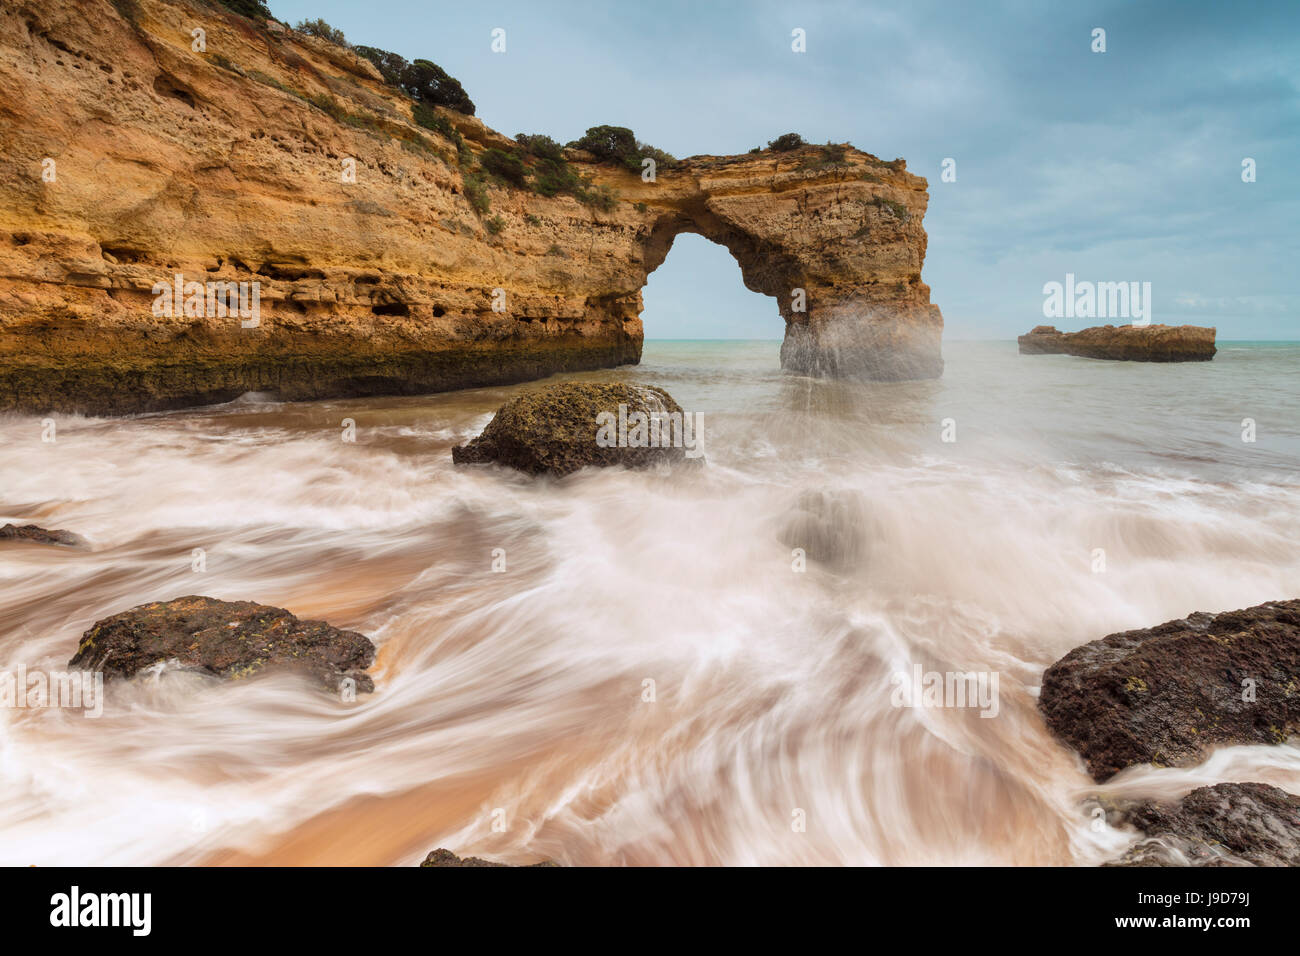 Waves crashing on the sand beach surrounded by cliffs, Albandeira, Lagoa Municipality, Algarve, Portugal, Europe Stock Photo